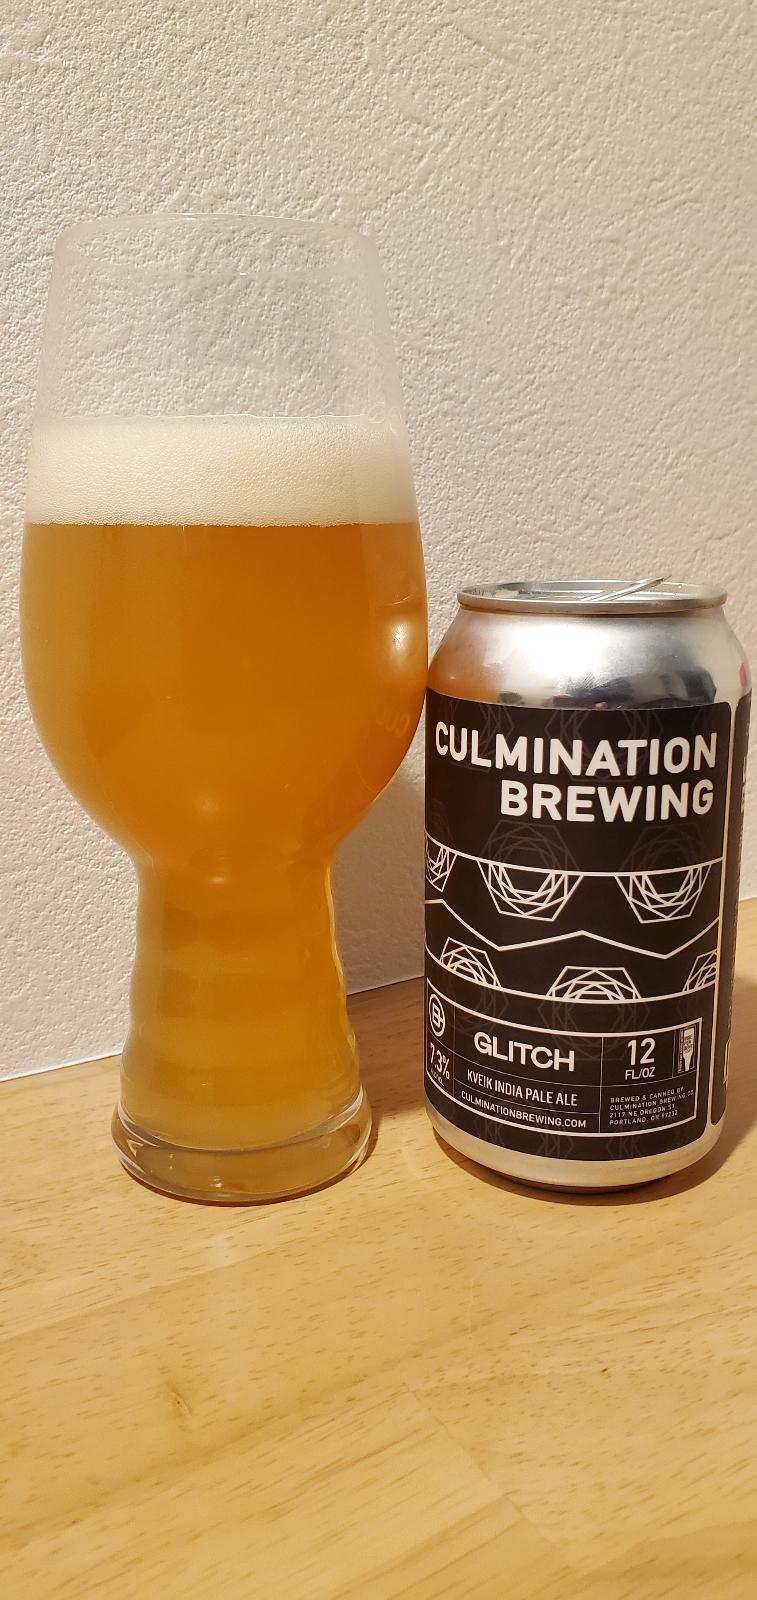 Glitch (Collaboration with Upright Brewing)